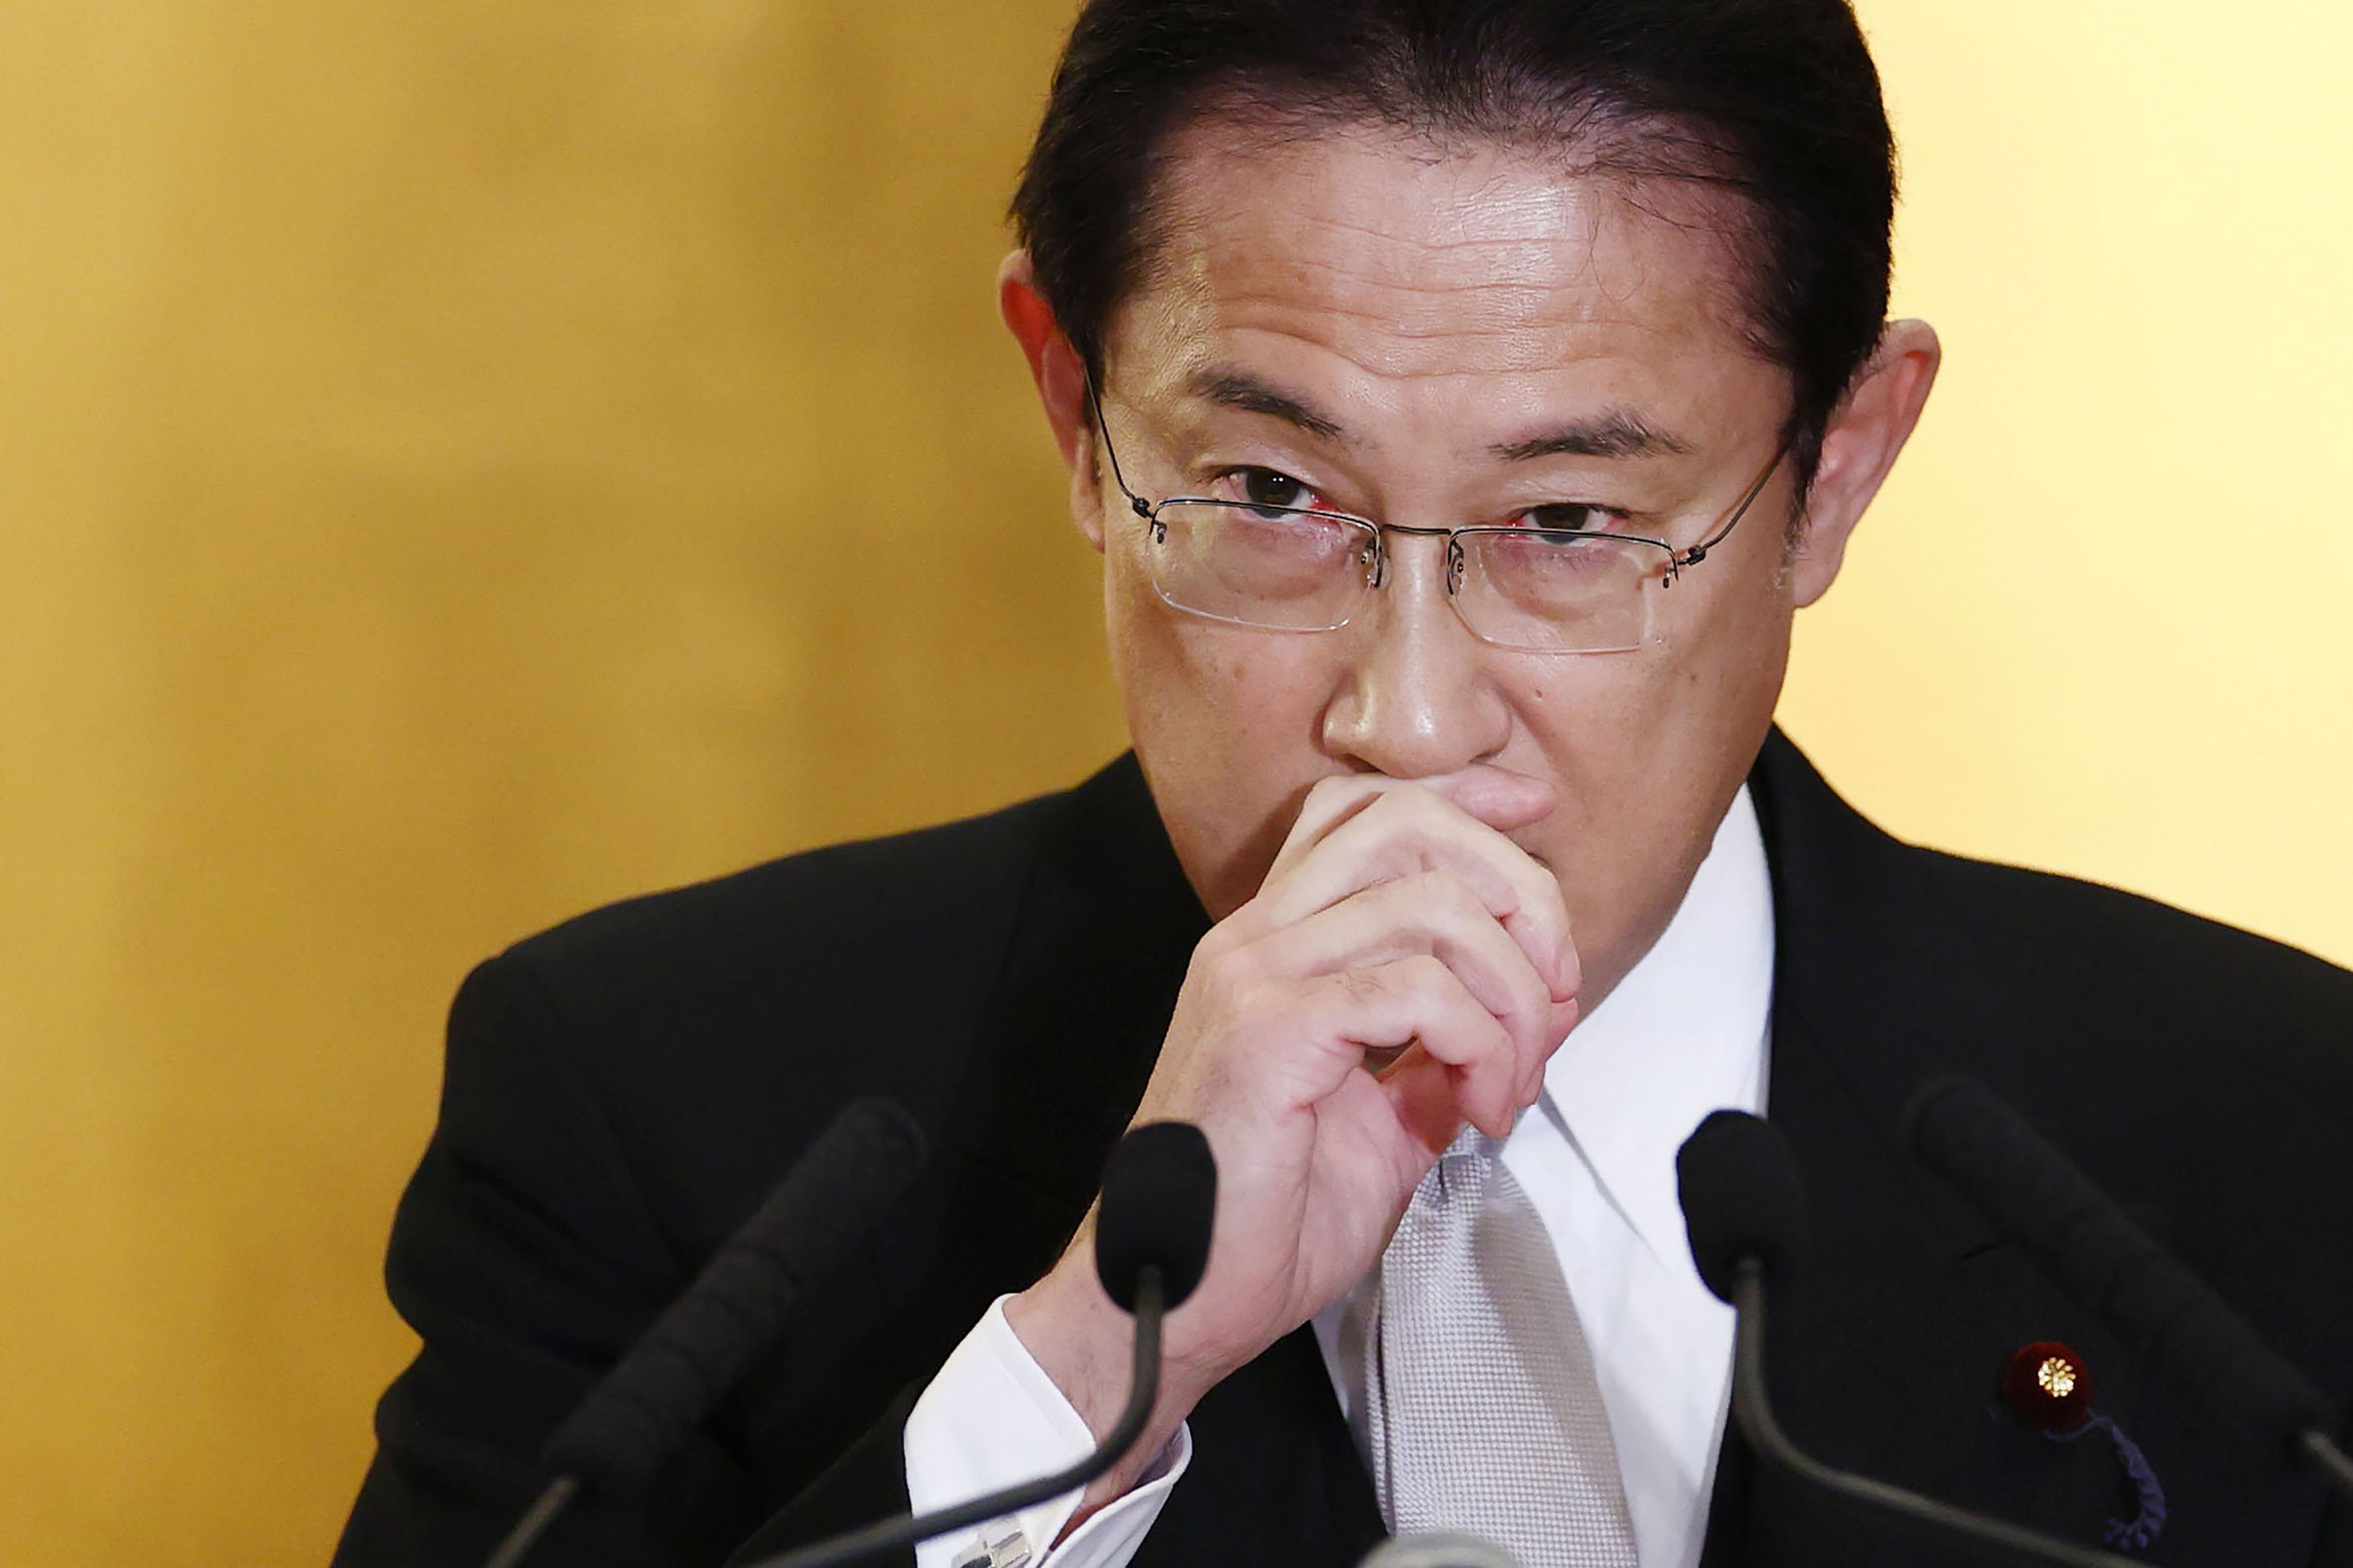 After taking office last October, Japanese prime minister Fumio Kishida faces a range of tough issues including economic recovery and growing concerns about China’s power.Photo: Kyodo News via AP